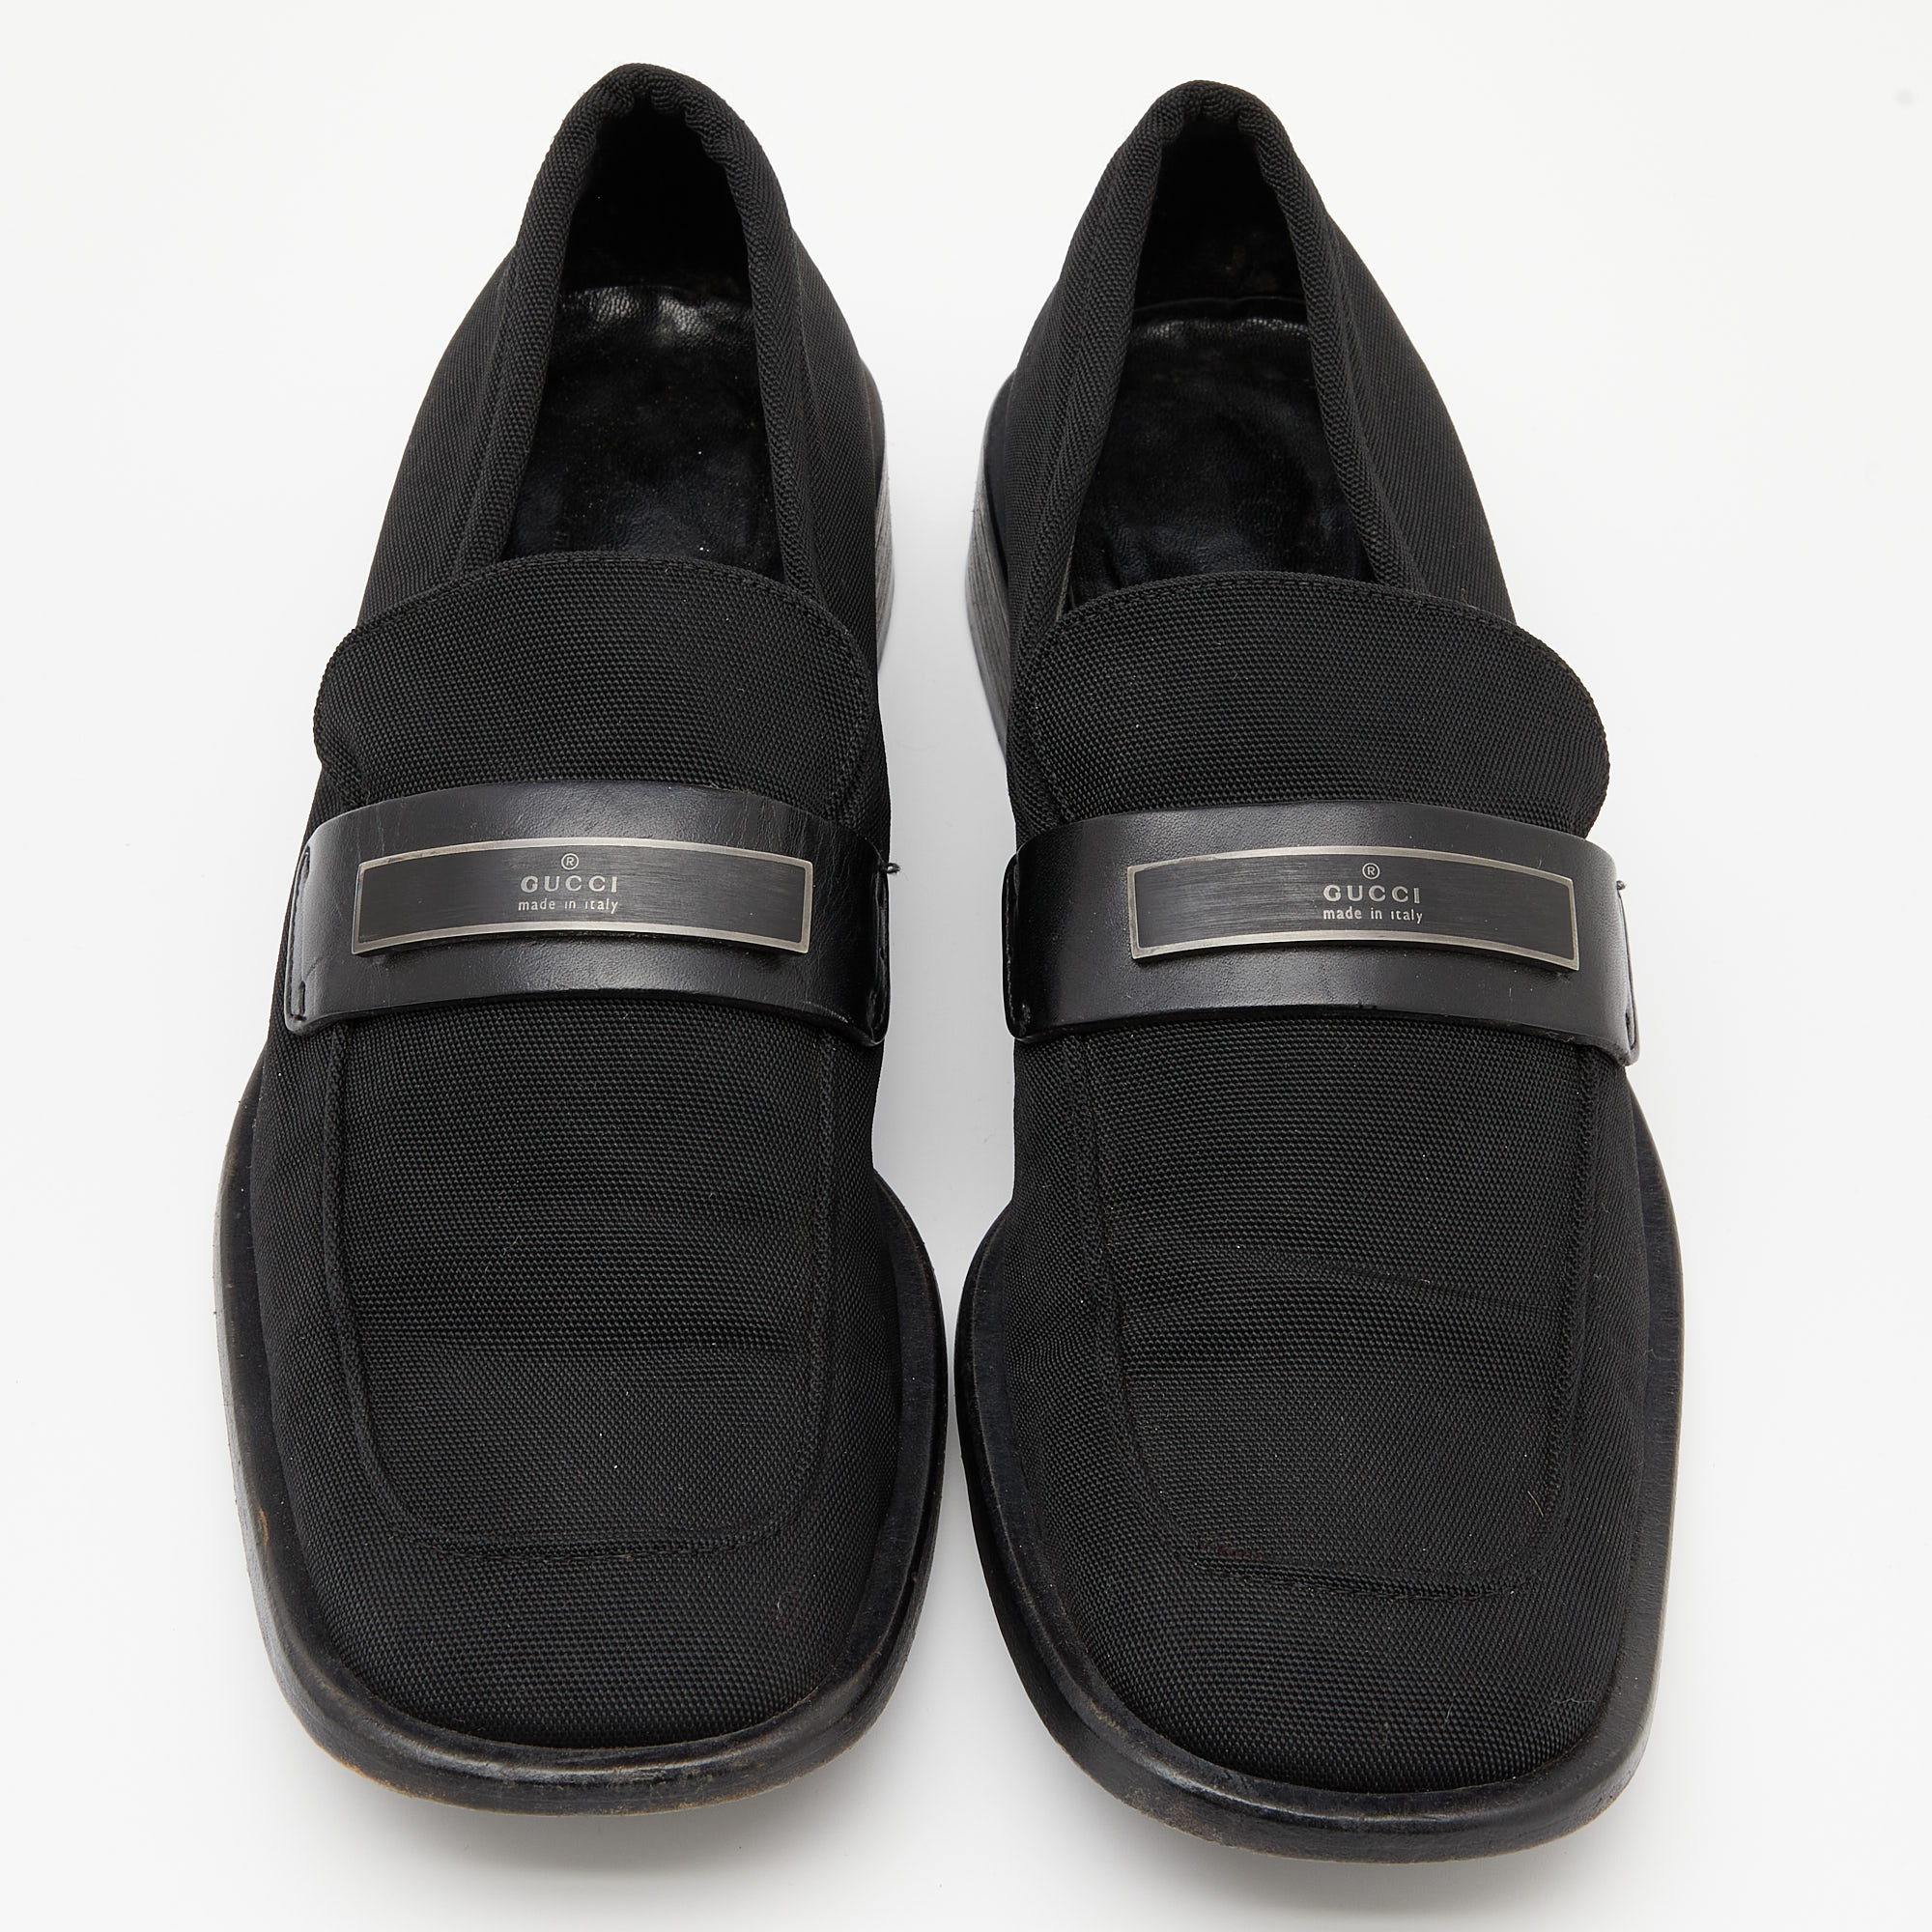 Gucci Black Canvas Slip On Loafers Size 37.5